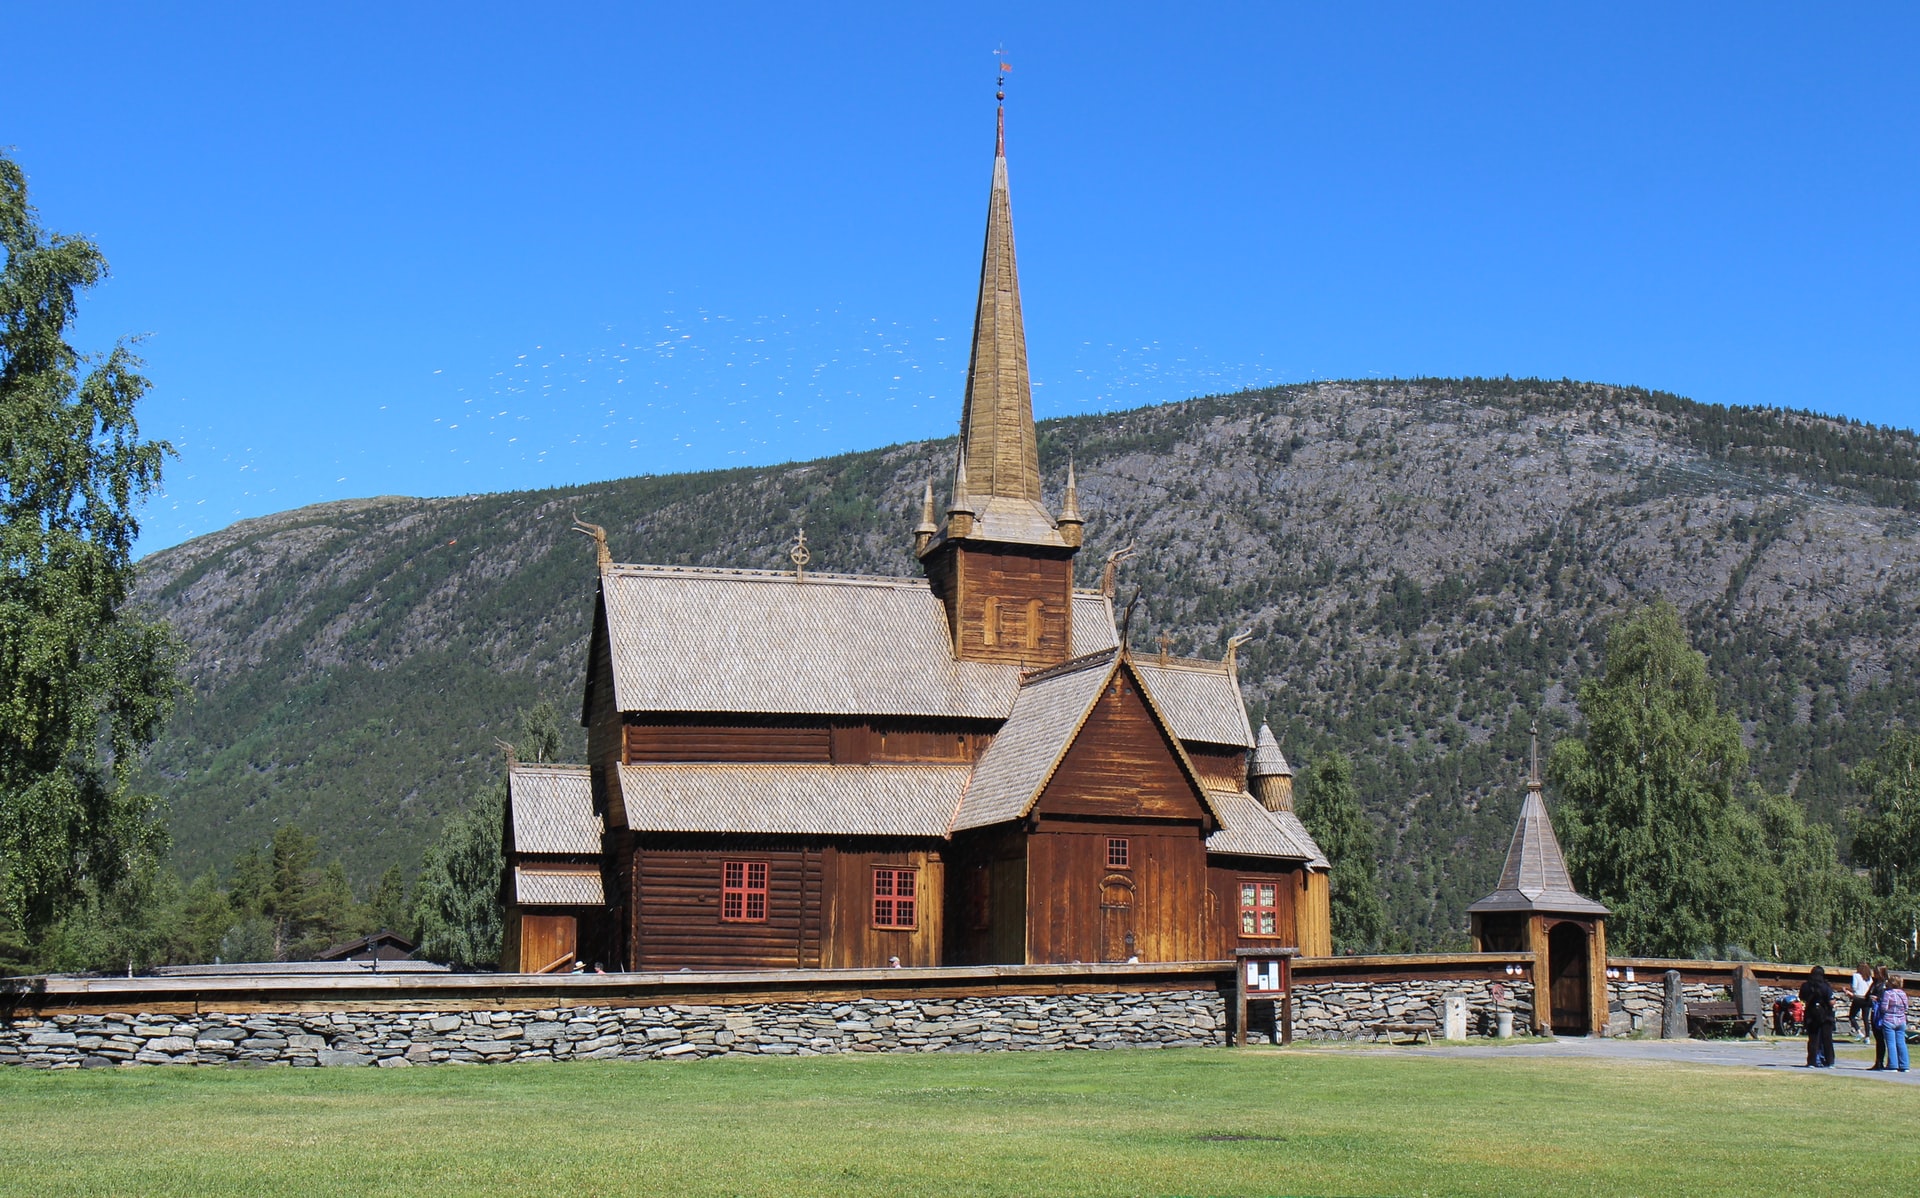 Sunny daytime image of 11th century Lom stave church in Norway shown as example of wood building endurance